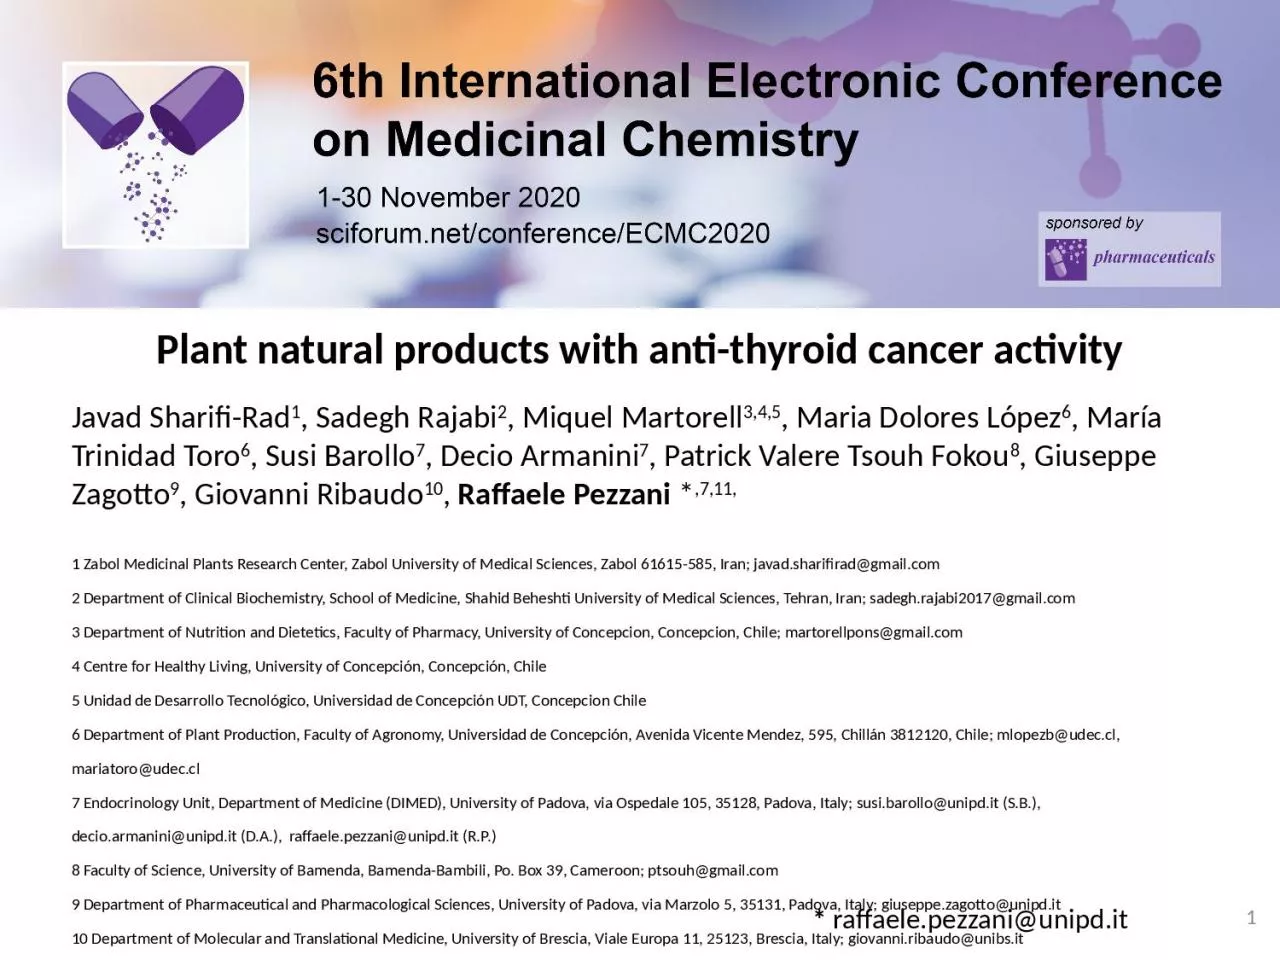 Plant natural products with anti-thyroid cancer